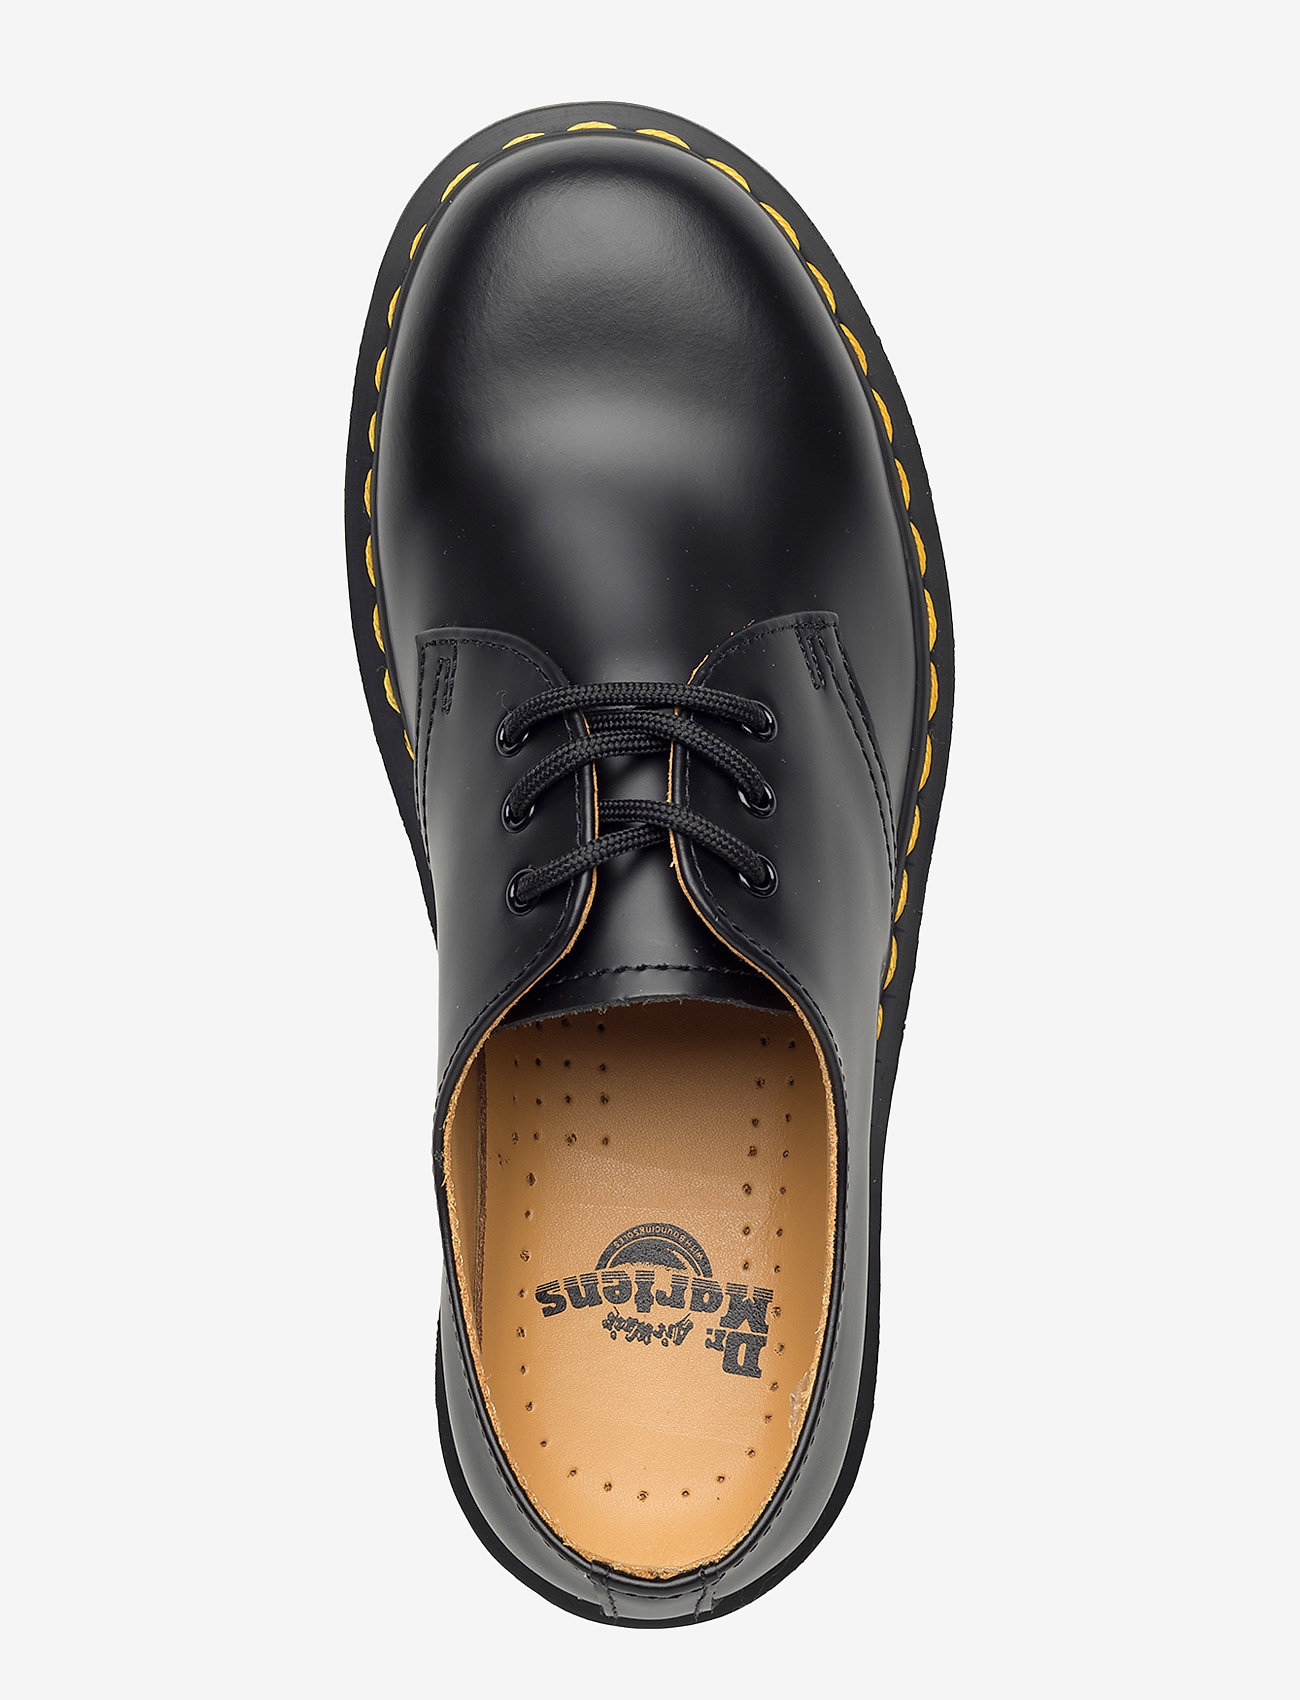 Dr. Martens - 1461 Black Smooth - chaussures oxford - black - 3